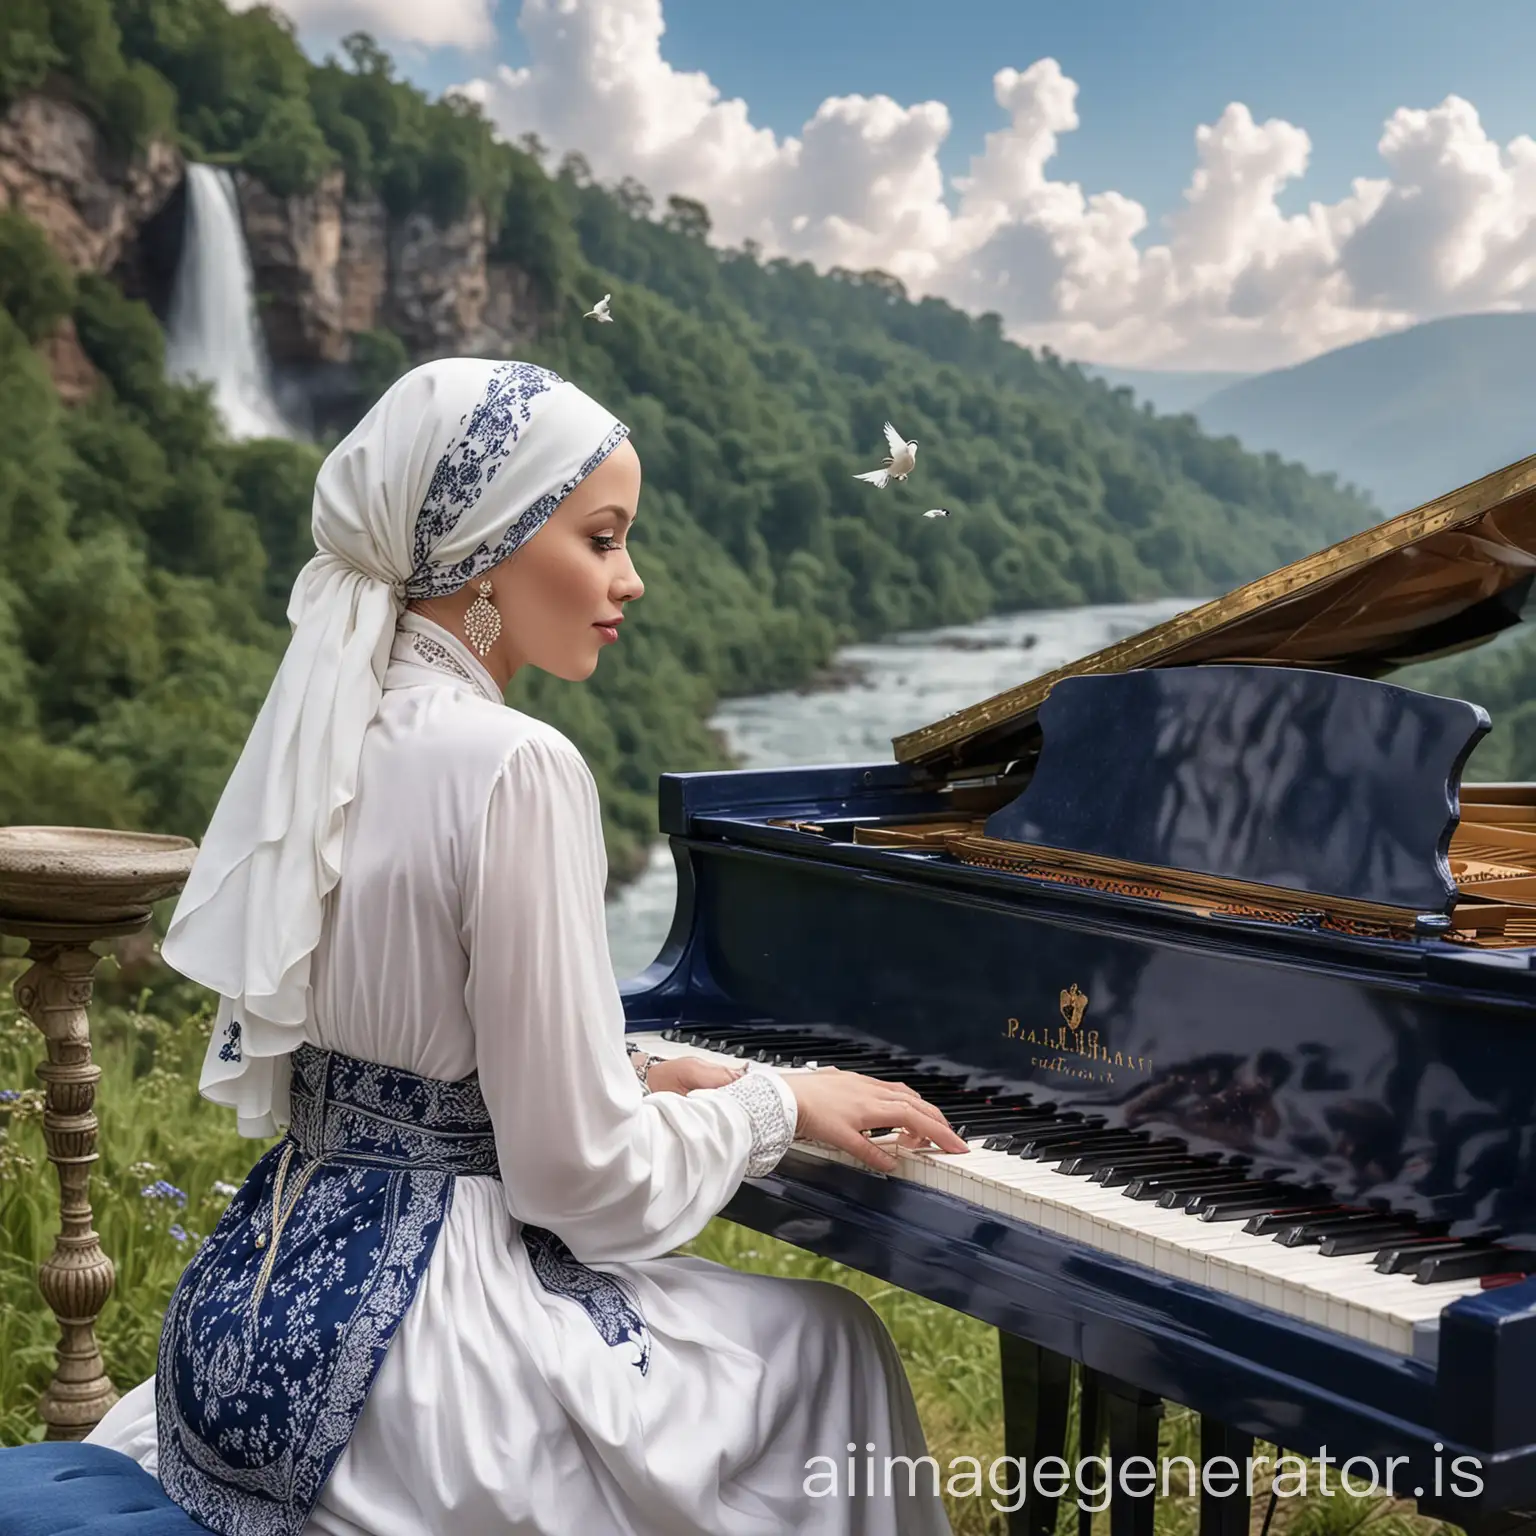 A back view of a bald nice large sized fair skin royal lady with oval face wearing a dark blue bandana on head & a white royal brim hat on it, wearing an elegant long-sleeve white hijab dress & pearl earrings, playing a white baby grand piano near a waterfall with chirping birds sitting around & white clouds in blue sky